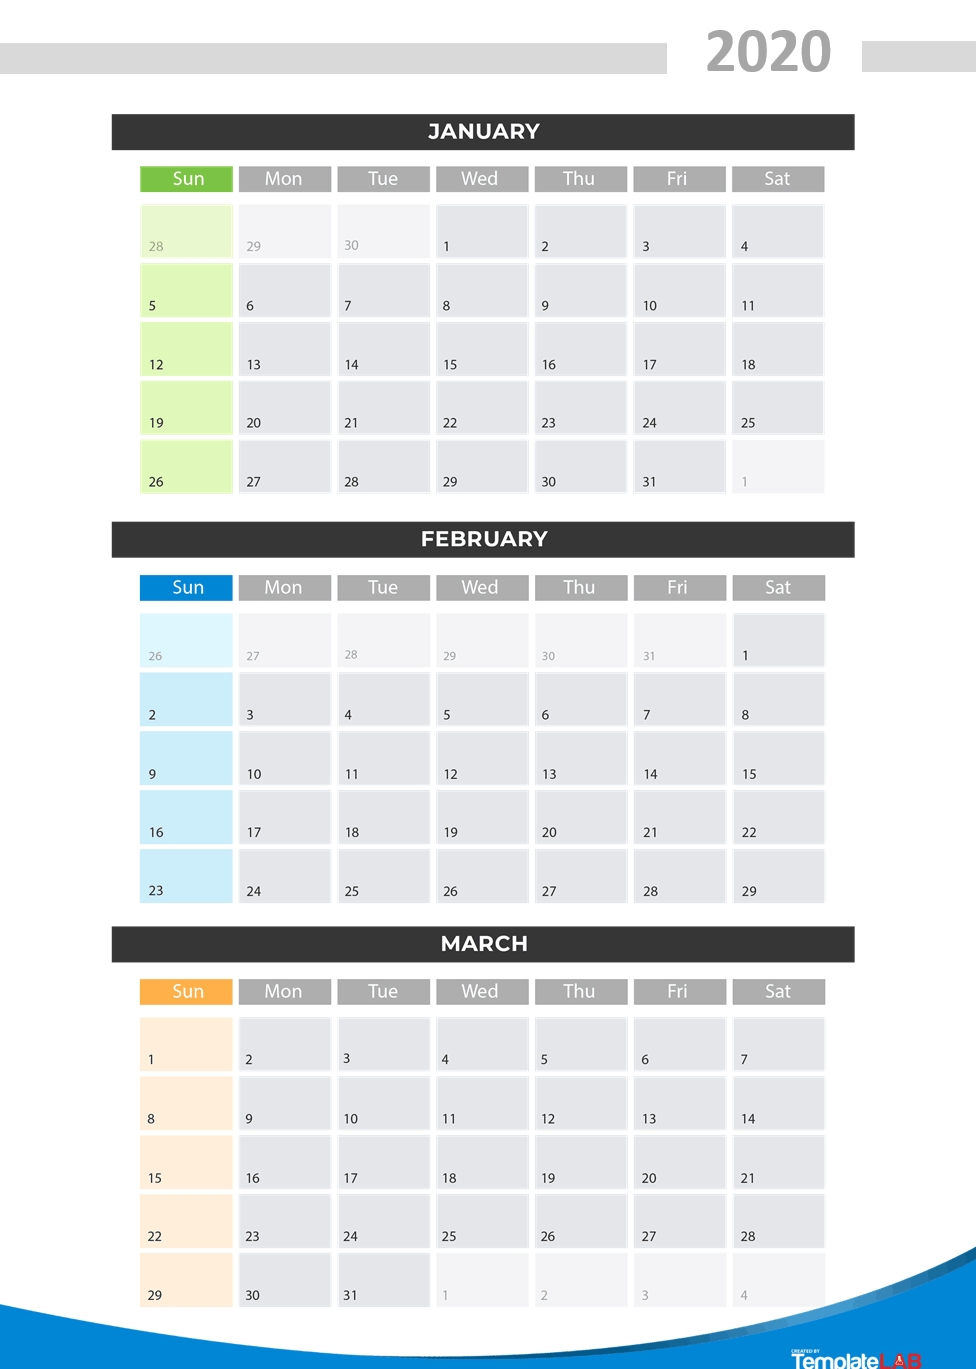 2020 Printable Calendars [Monthly, With Holidays, Yearly] ᐅ regarding 2020 Printable Calendar Templates Quarterly